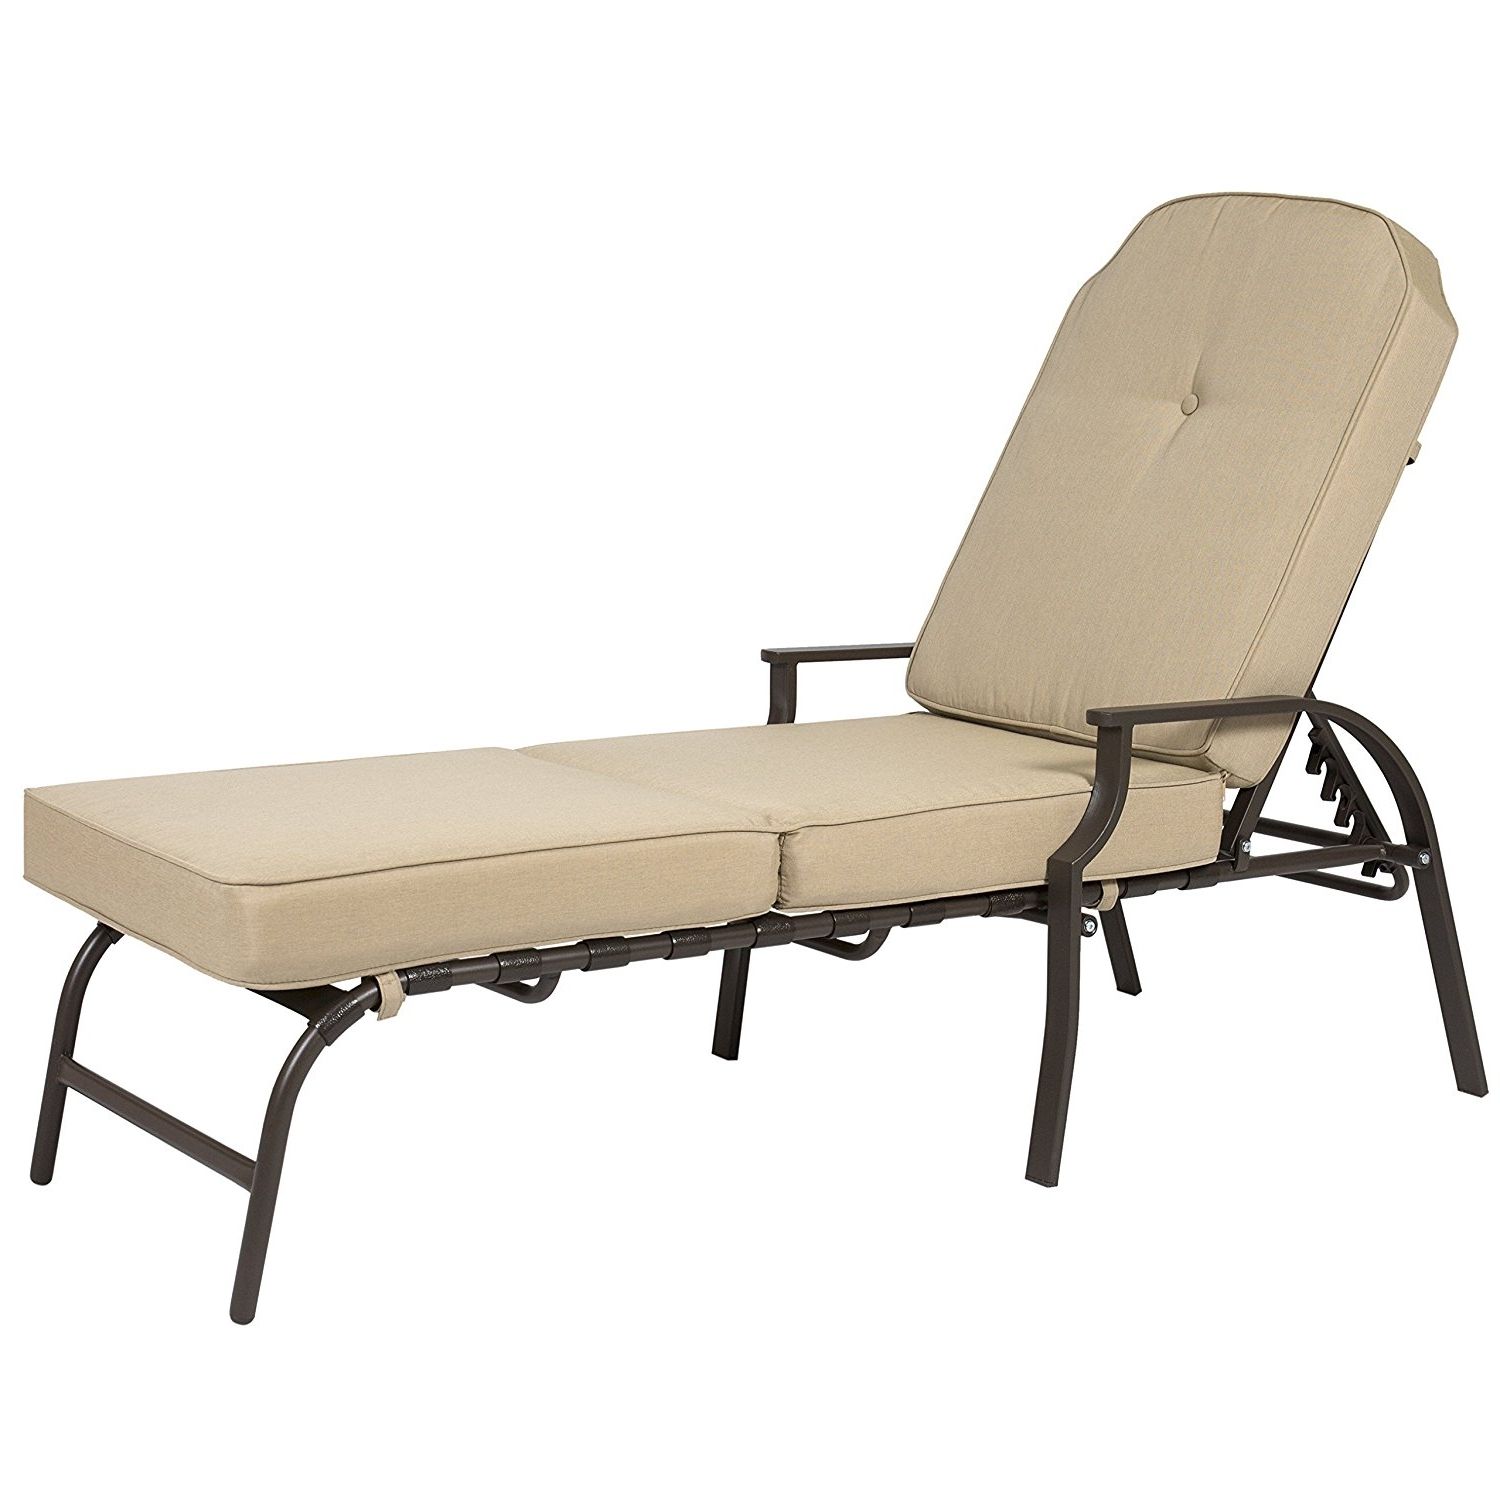 Amazon : Best Choice Products Outdoor Chaise Lounge Chair W Regarding Fashionable Pool Chaise Lounge Chairs (View 8 of 15)